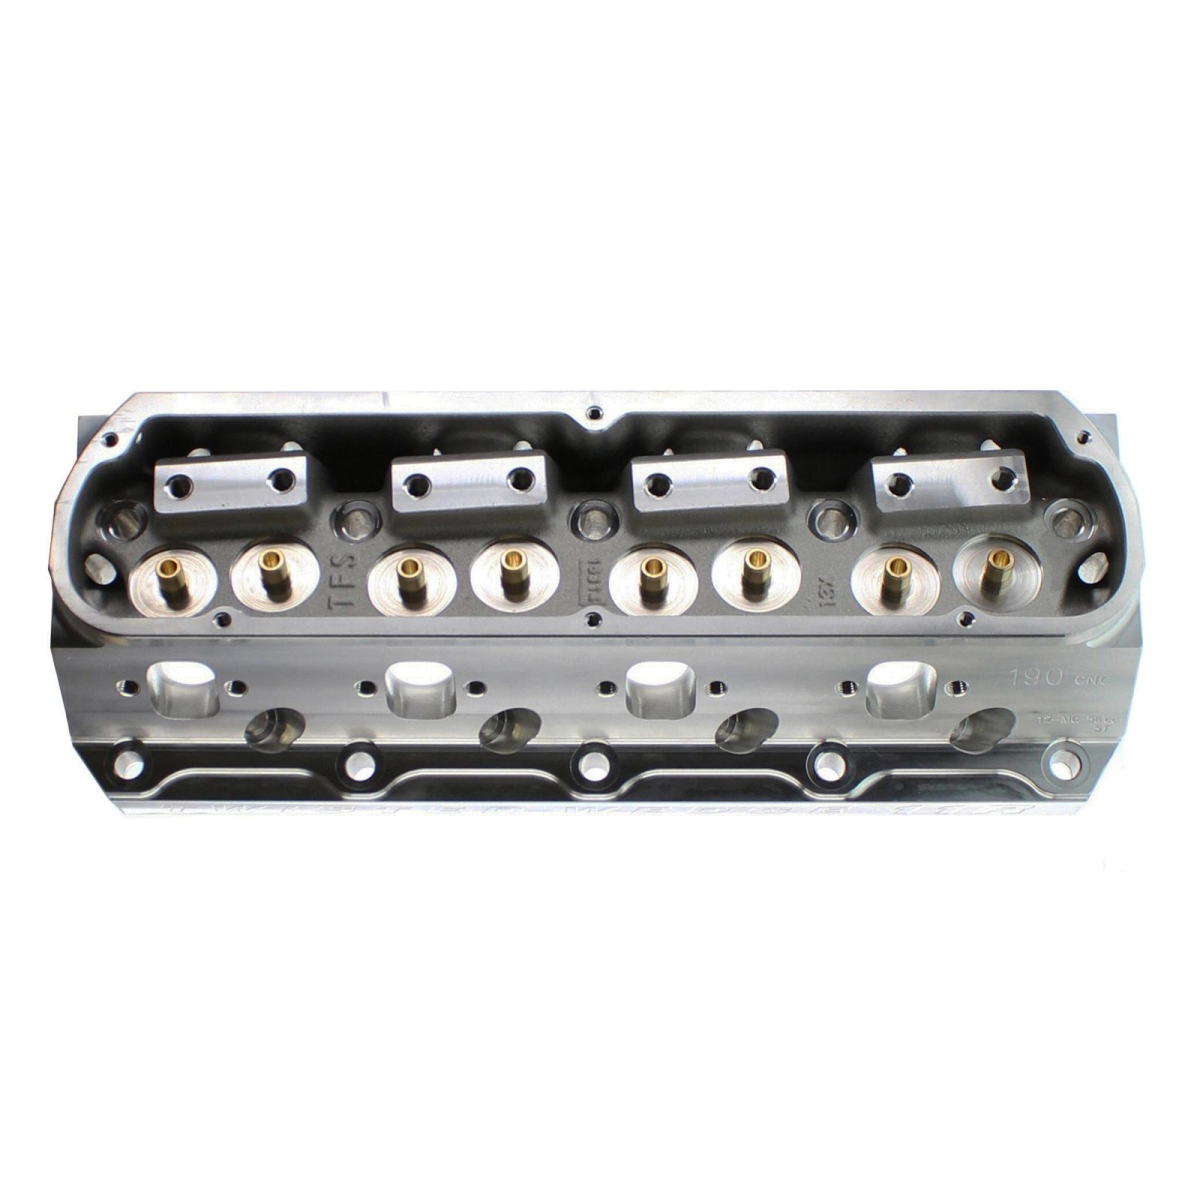 Trickflow - Trick Flow Twisted Wedge 11R Street 190cc Bare Cylinder Head Casting, SBF, 66cc Chambers - Image 1